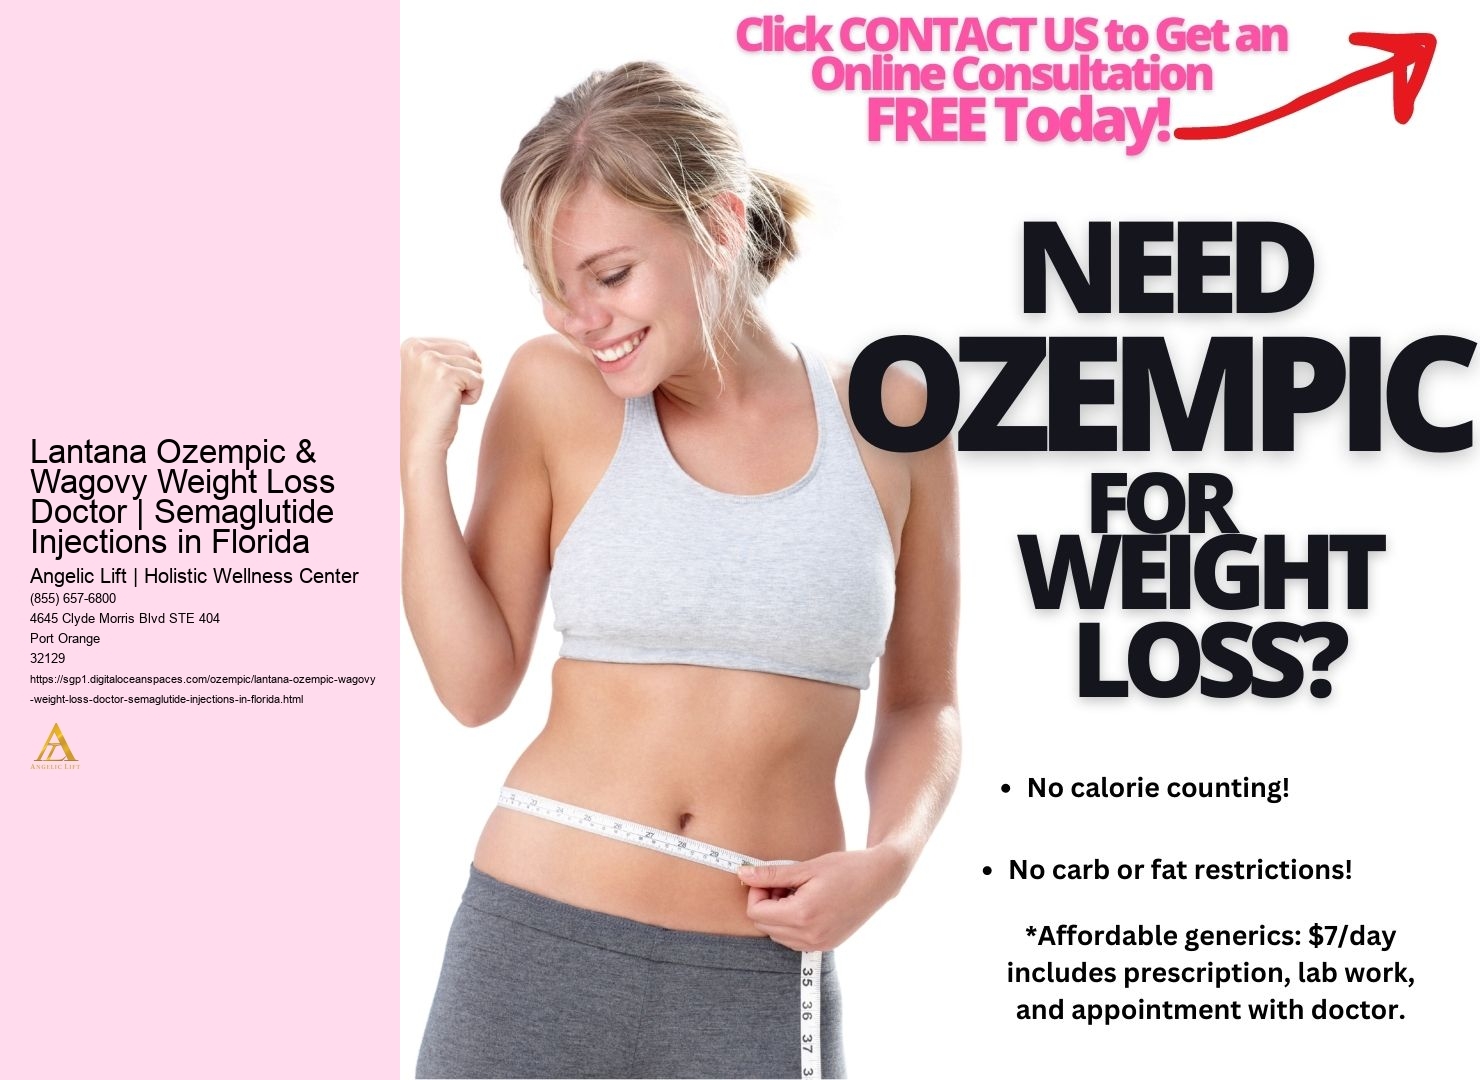 Lantana Ozempic & Wagovy Weight Loss Doctor | Semaglutide Injections in Florida